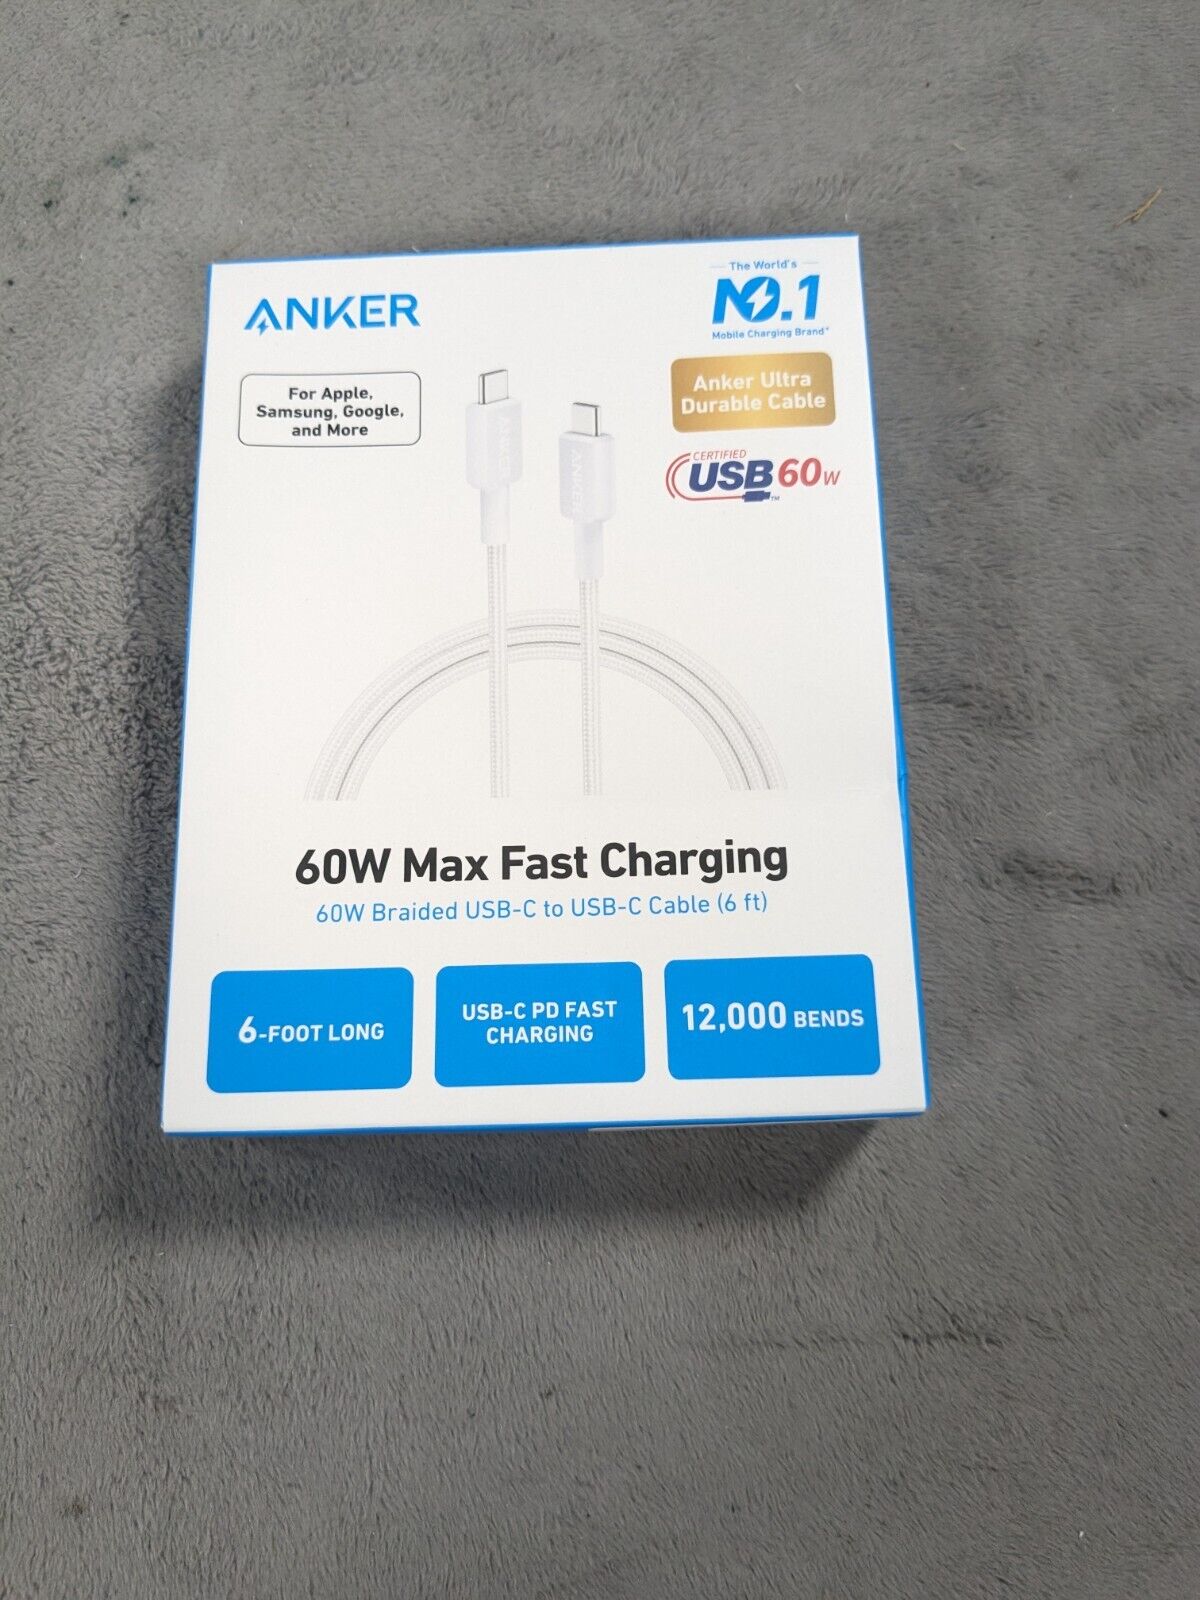 Anker 6ft 60W Max Fast Charging Braided USB-C to USB-C